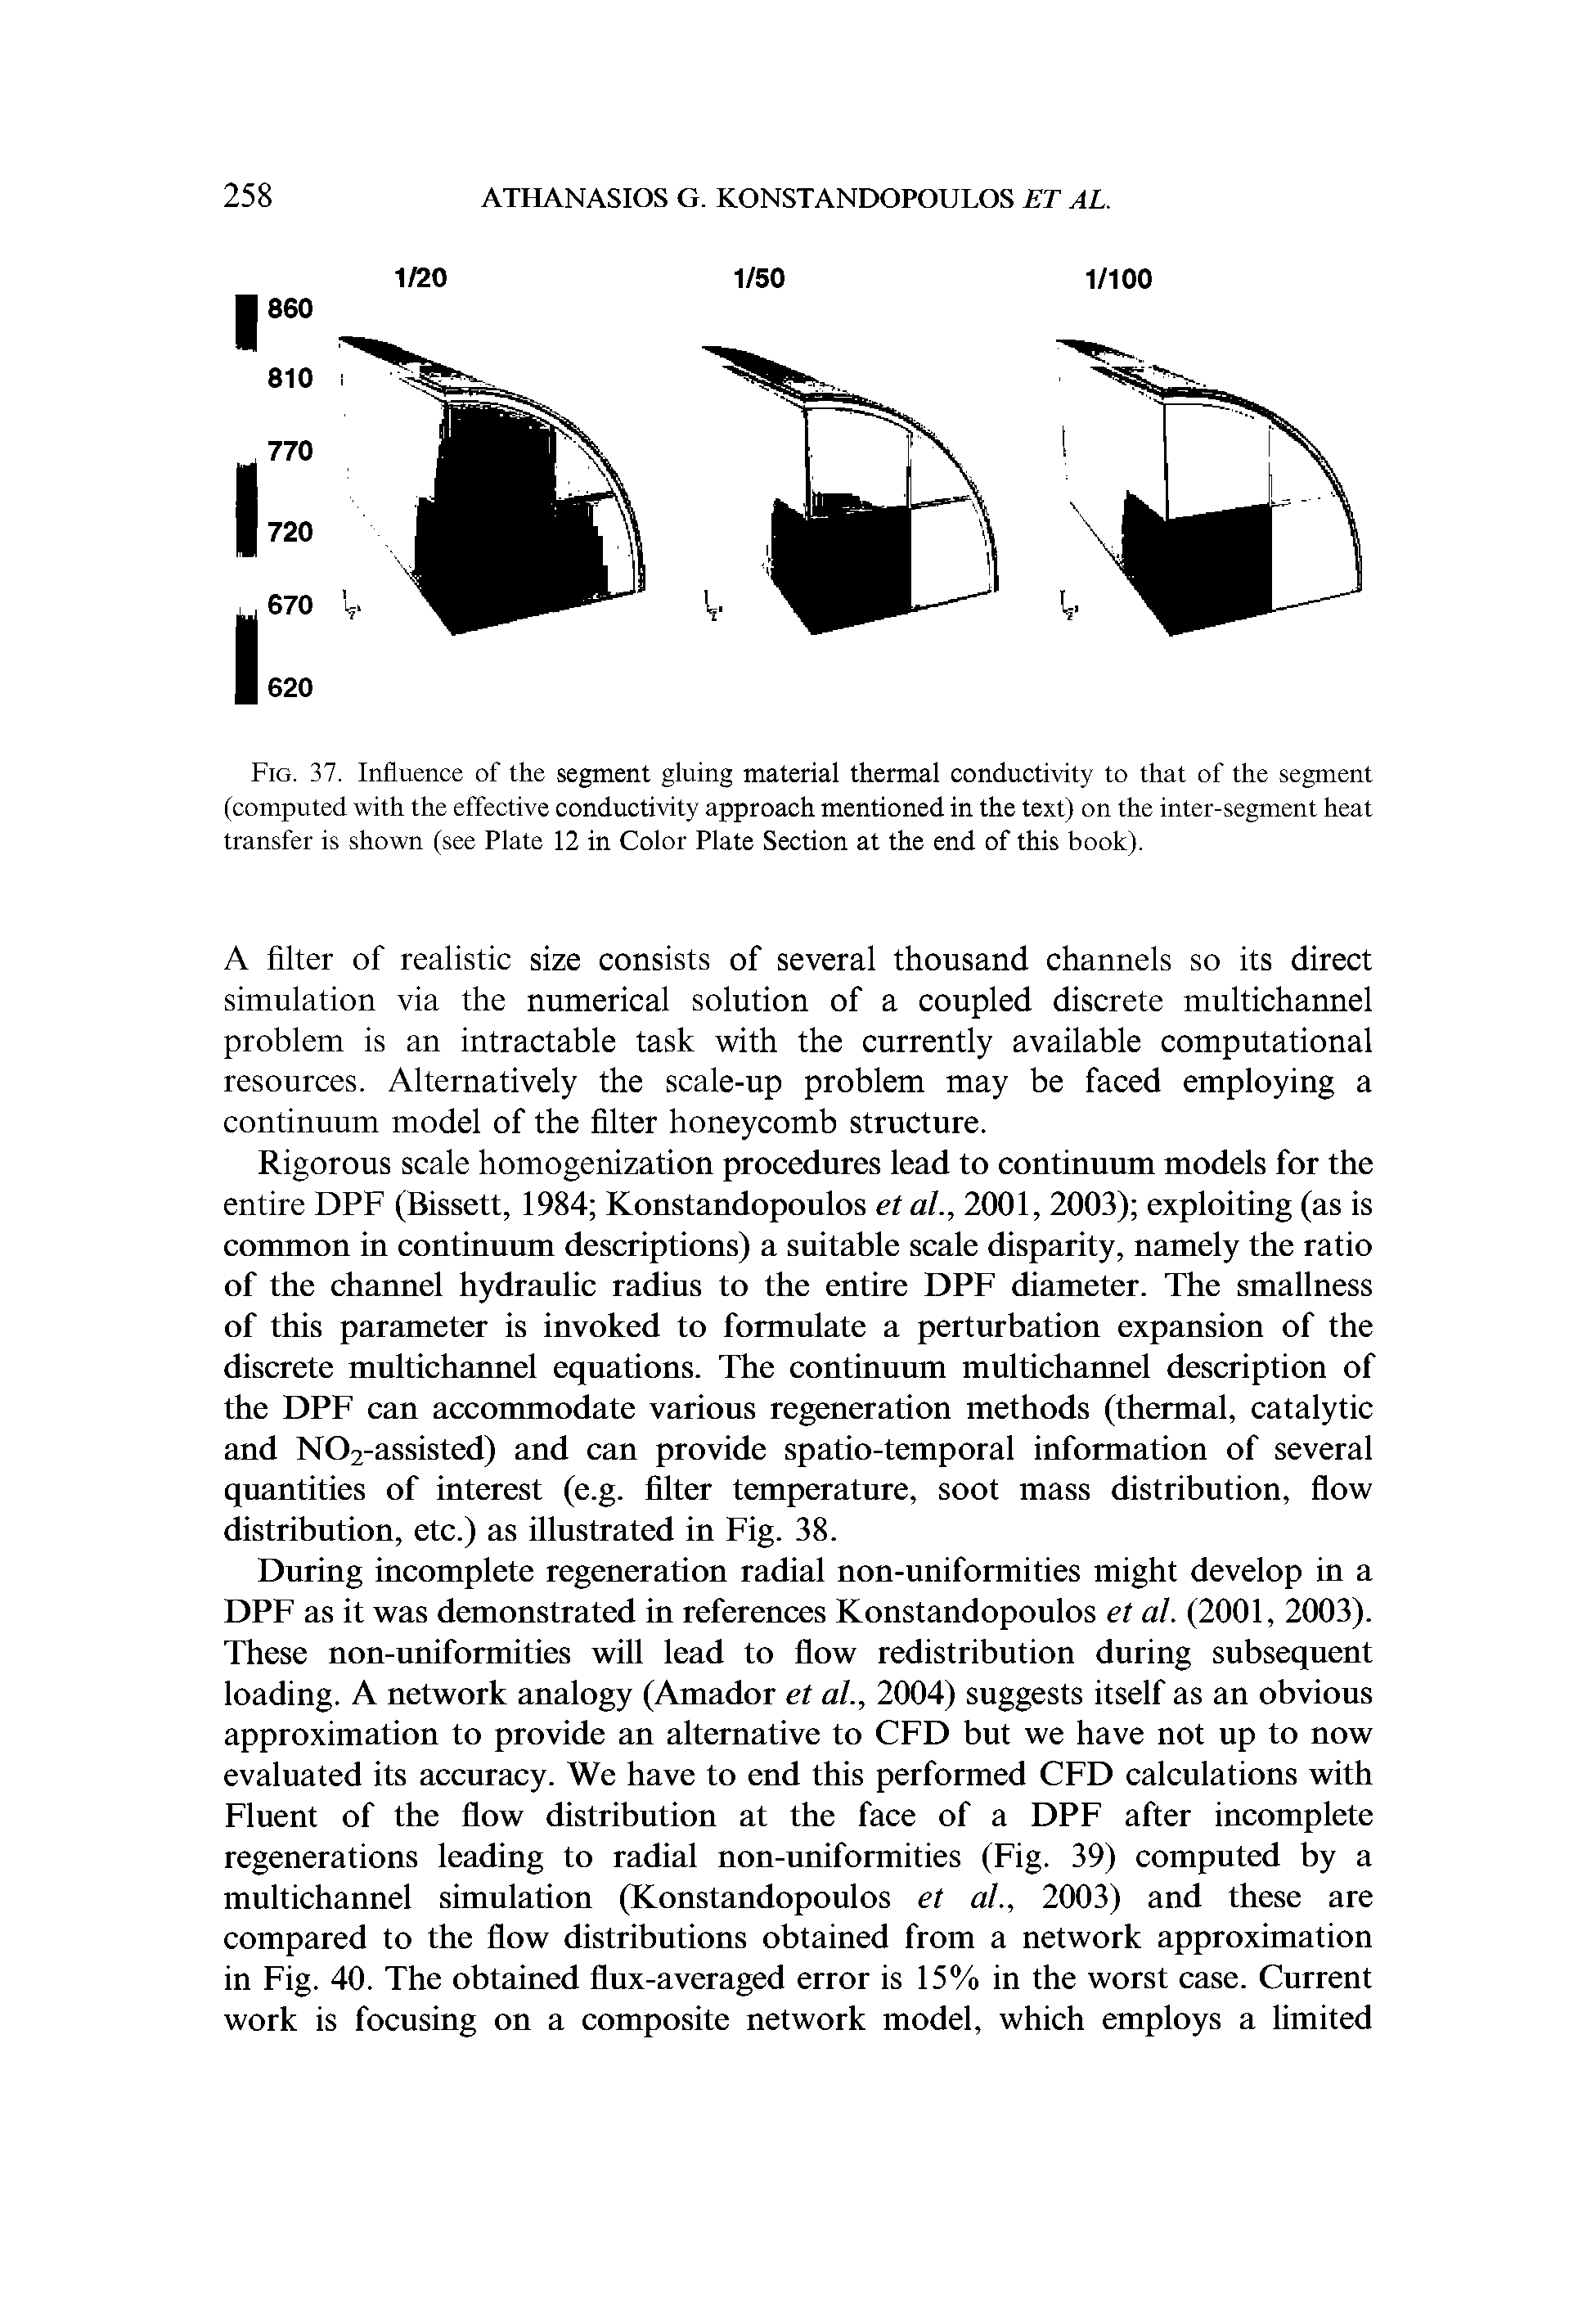 Fig. 37. Influence of the segment gluing material thermal conductivity to that of the segment (computed with the effective conductivity approach mentioned in the text) on the inter-segment heat transfer is shown (see Plate 12 in Color Plate Section at the end of this book).